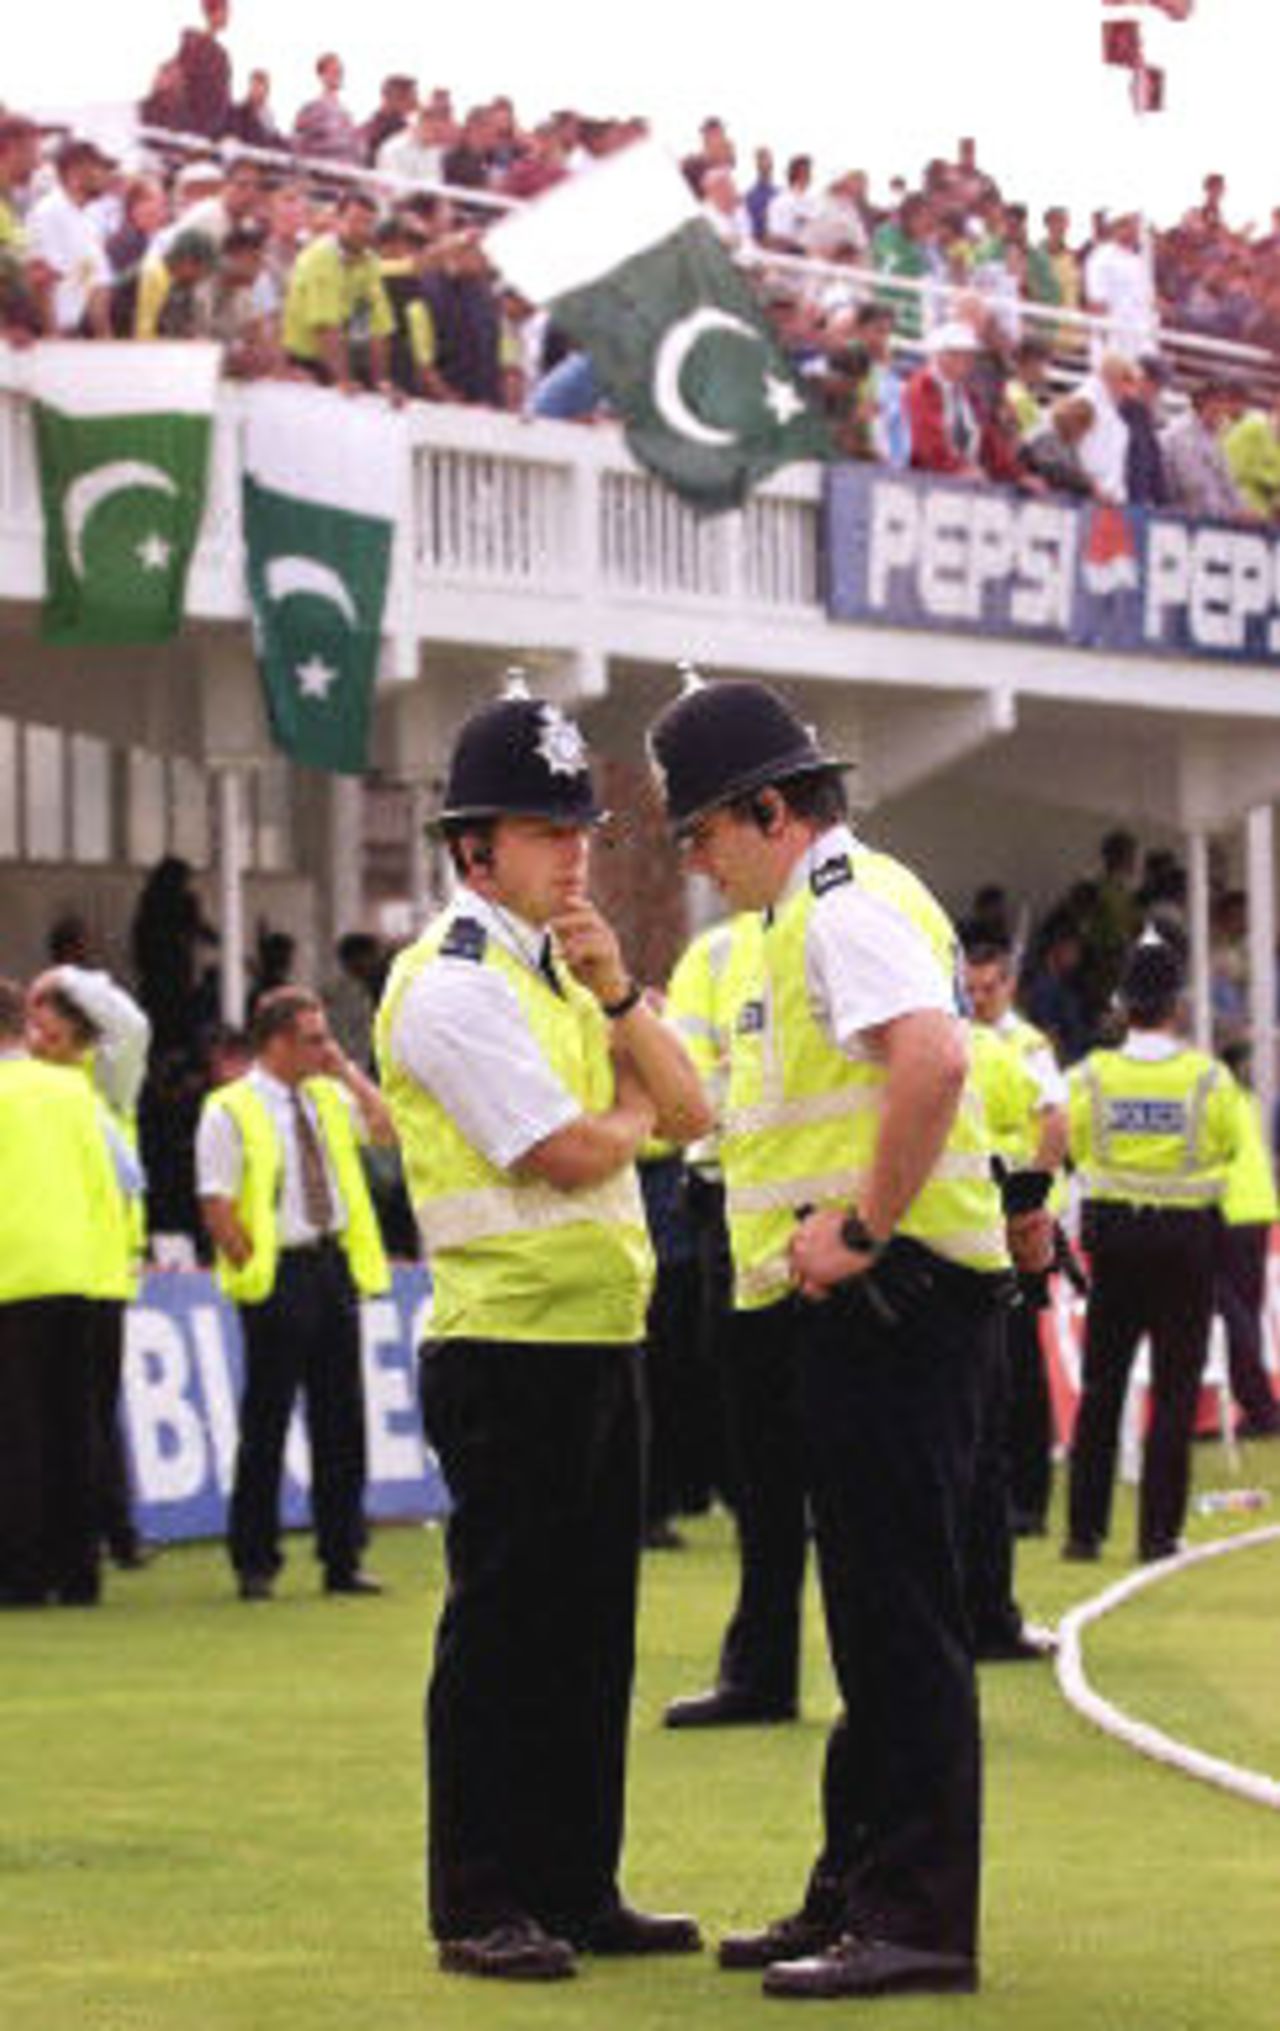 Two policemen discuss the situation after Steve Waugh led his team off the field, 8th ODI at Trent Bridge, 19 June 2001.